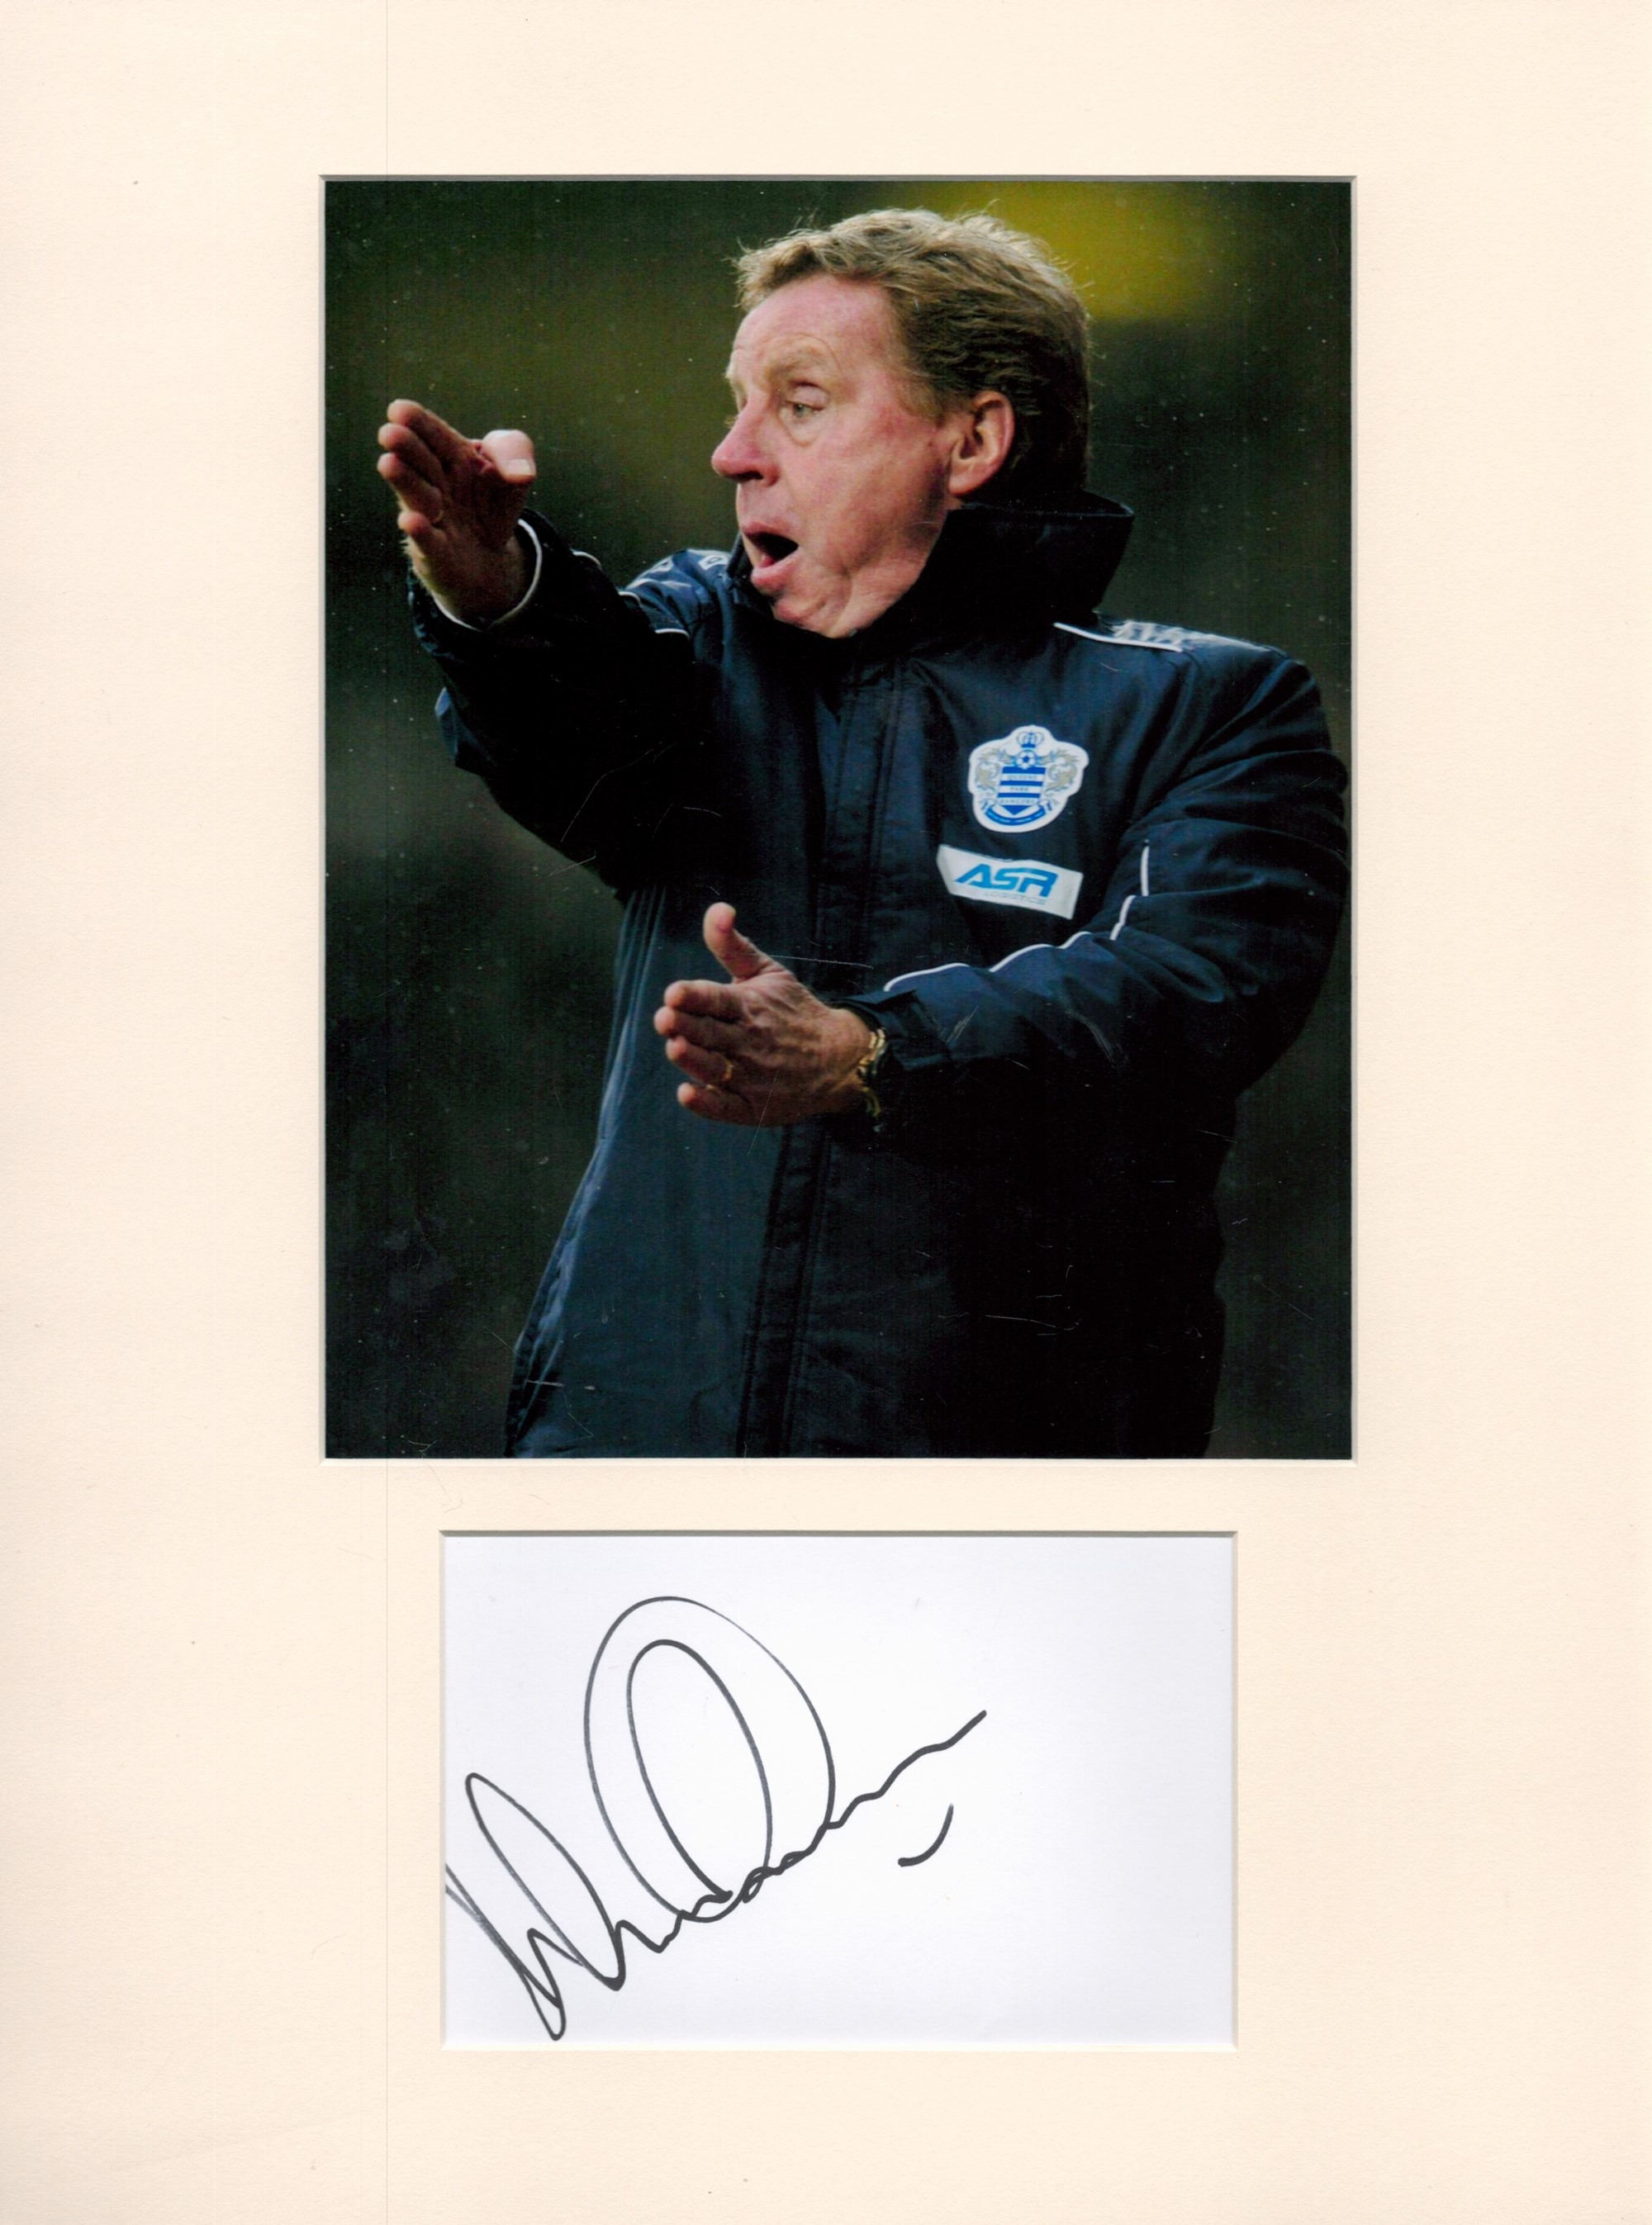 Football Harry Redknapp 16x12 overall QPR mounted signature piece includes a signed album page and a